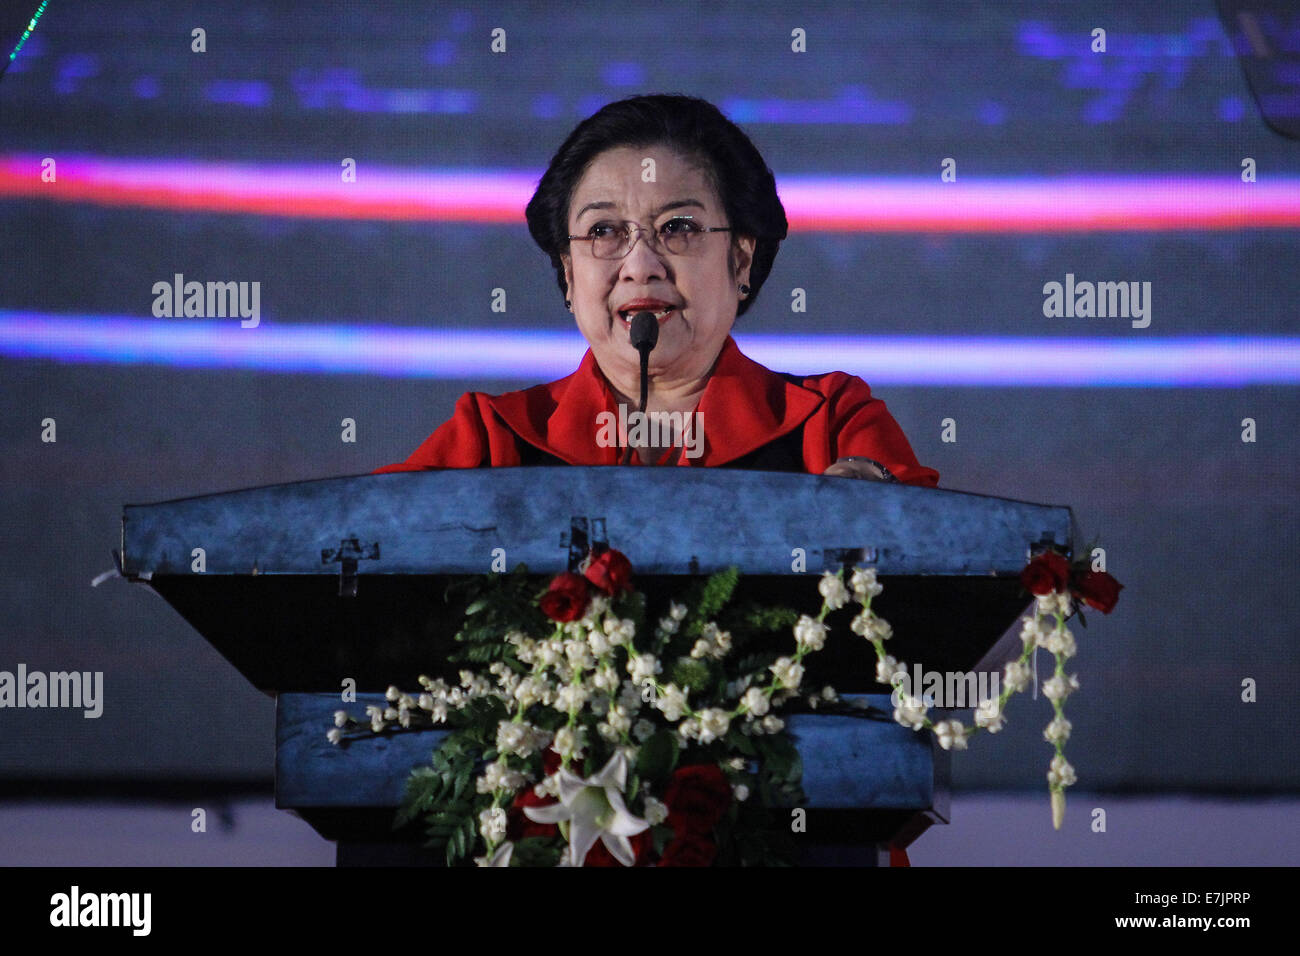 Semarang, Indonesia. 19th September, 2014. Former president and chairperson of Indonesian Democratic Party of Struggle (PDI-P) Megawati Sukarnoputri gestures as she delivers her speech during the 4th national working meeting of PDI-P at Marina Convention Hall in Semarang, Central Java, Indonesia. The national meeting attended by 1,590 party cadres from all over Indonesia and take place from 19-21 September 2014. The meeting is expected to change the 10-year mindset of the PDI-P, as it has switched to being the ruling party from being the opposition party. Credit:  PACIFIC PRESS/Alamy Live News Stock Photo